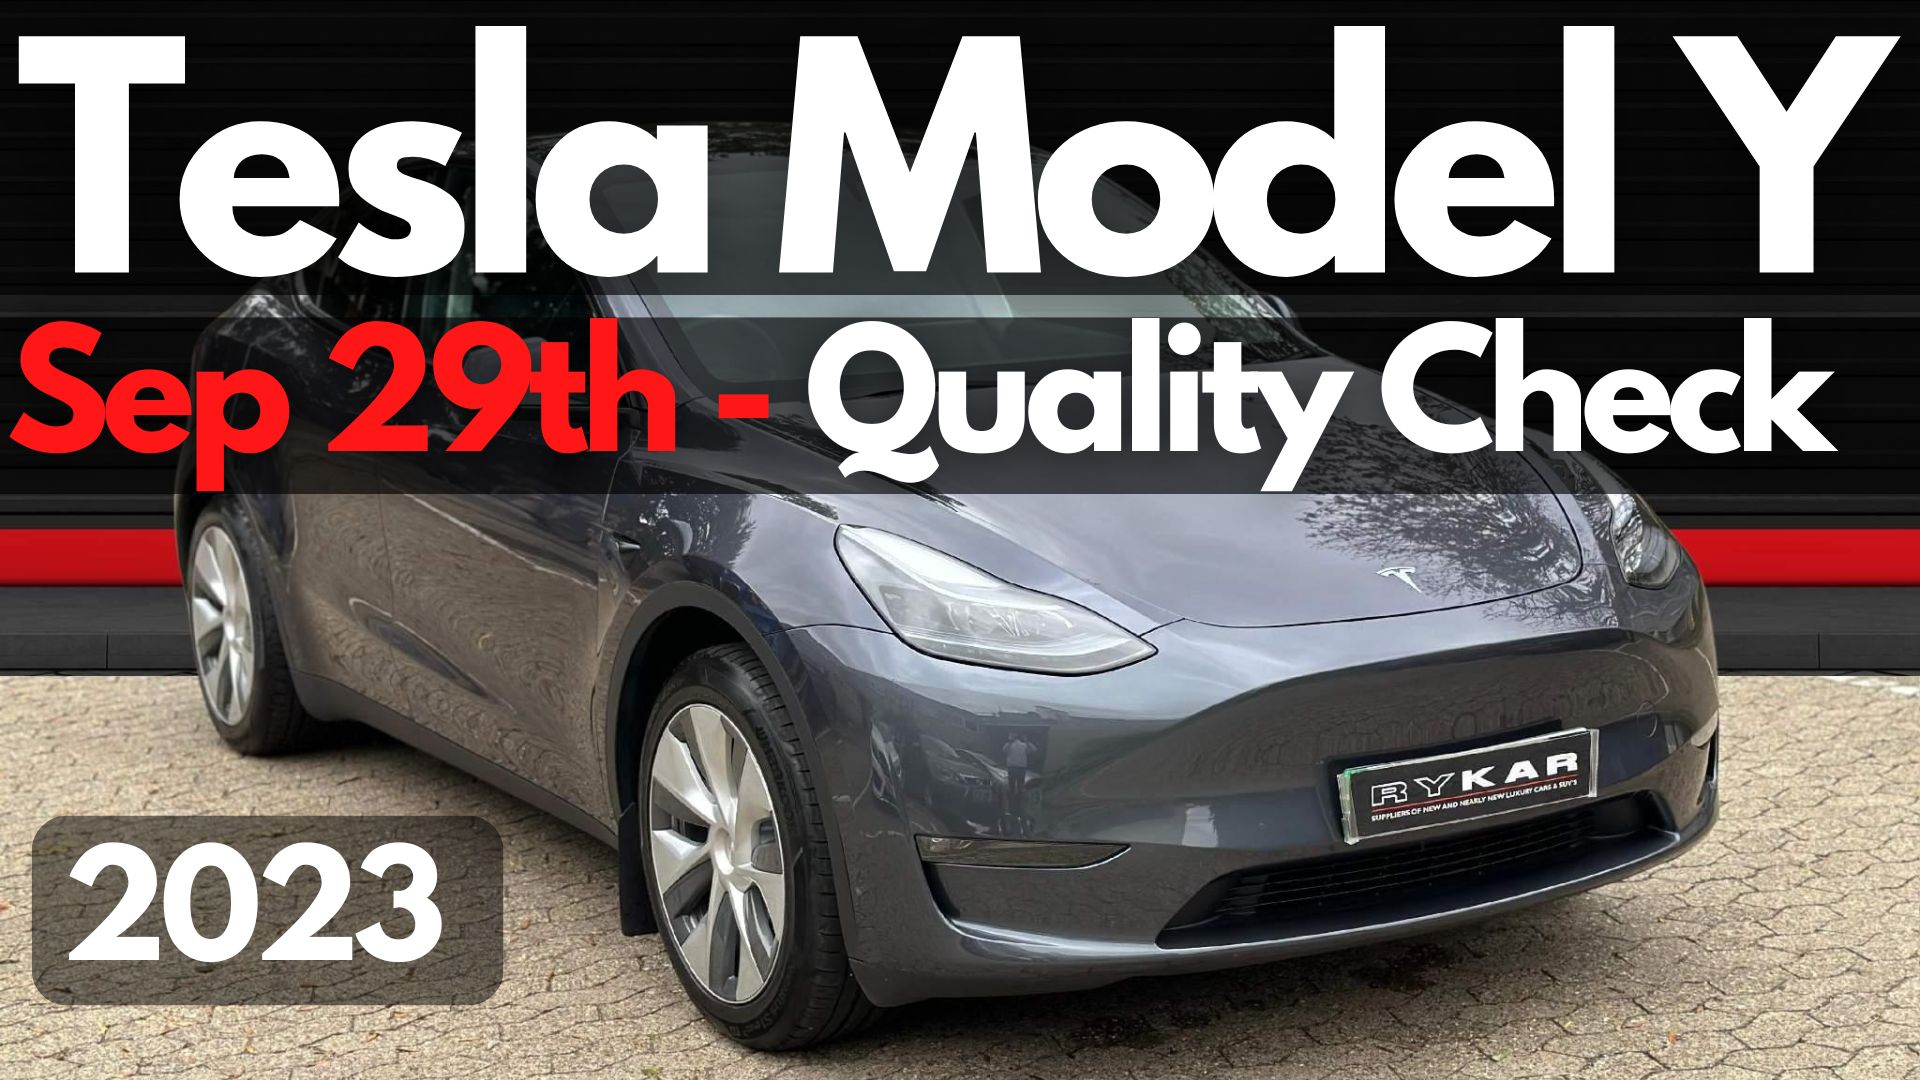 Has Tesla Improved The Model Y Build Quality For Sep 29, 2023?